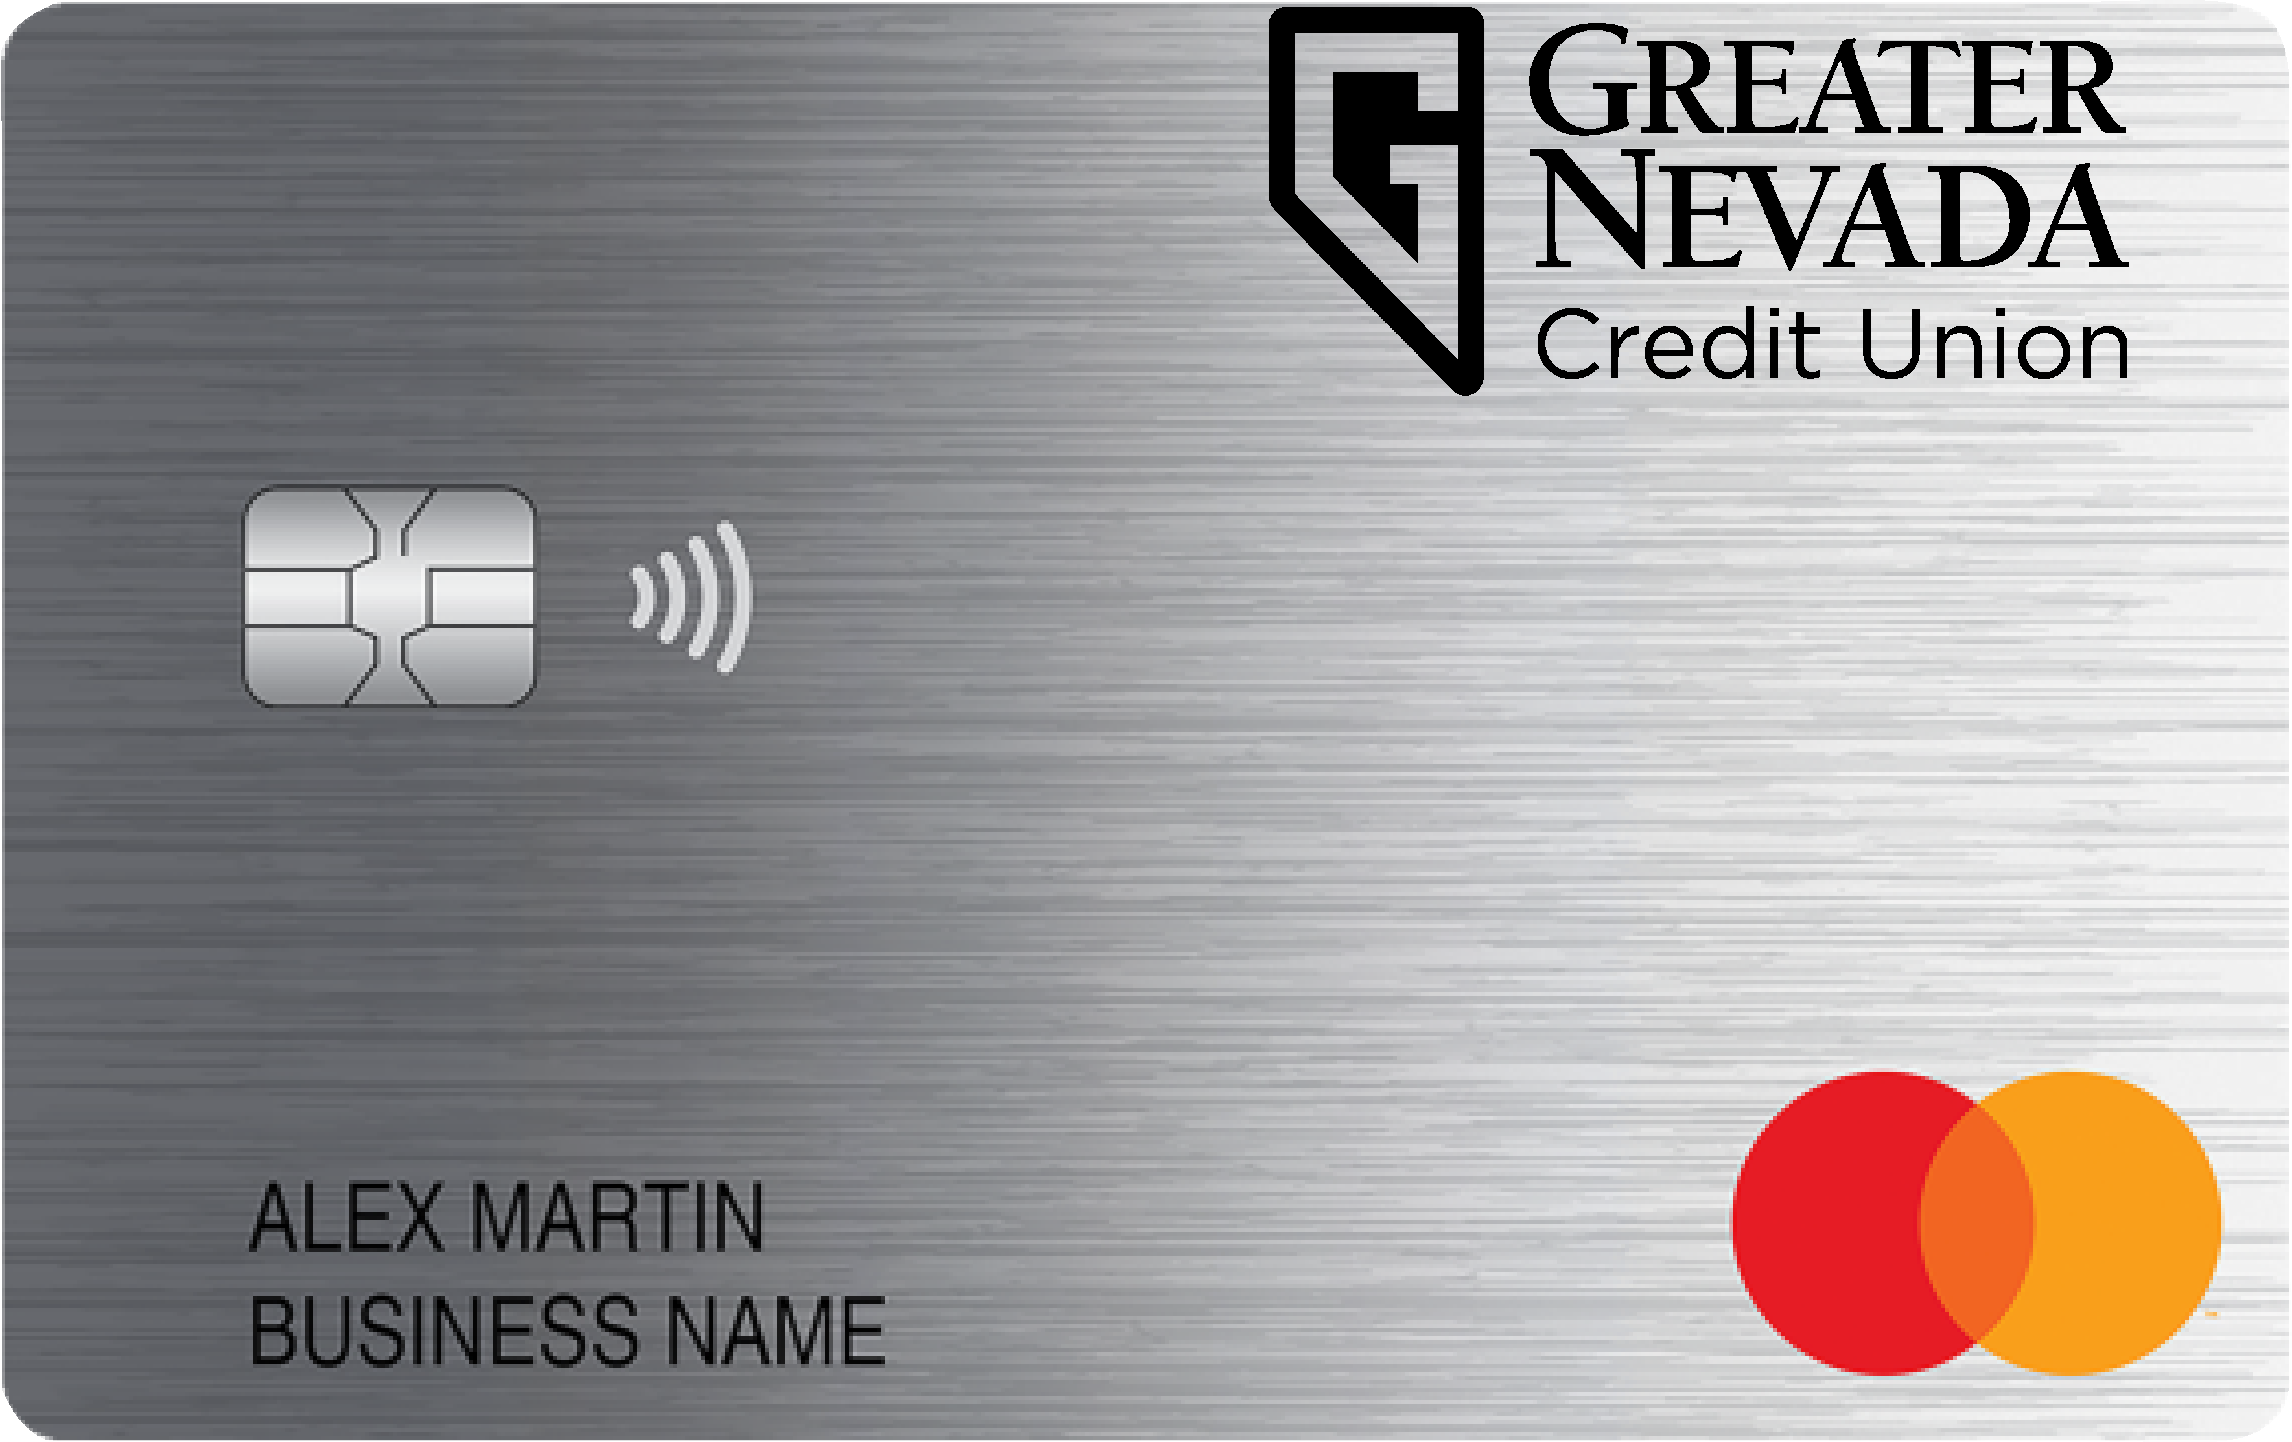 Greater Nevada Credit Union Smart Business Rewards Card